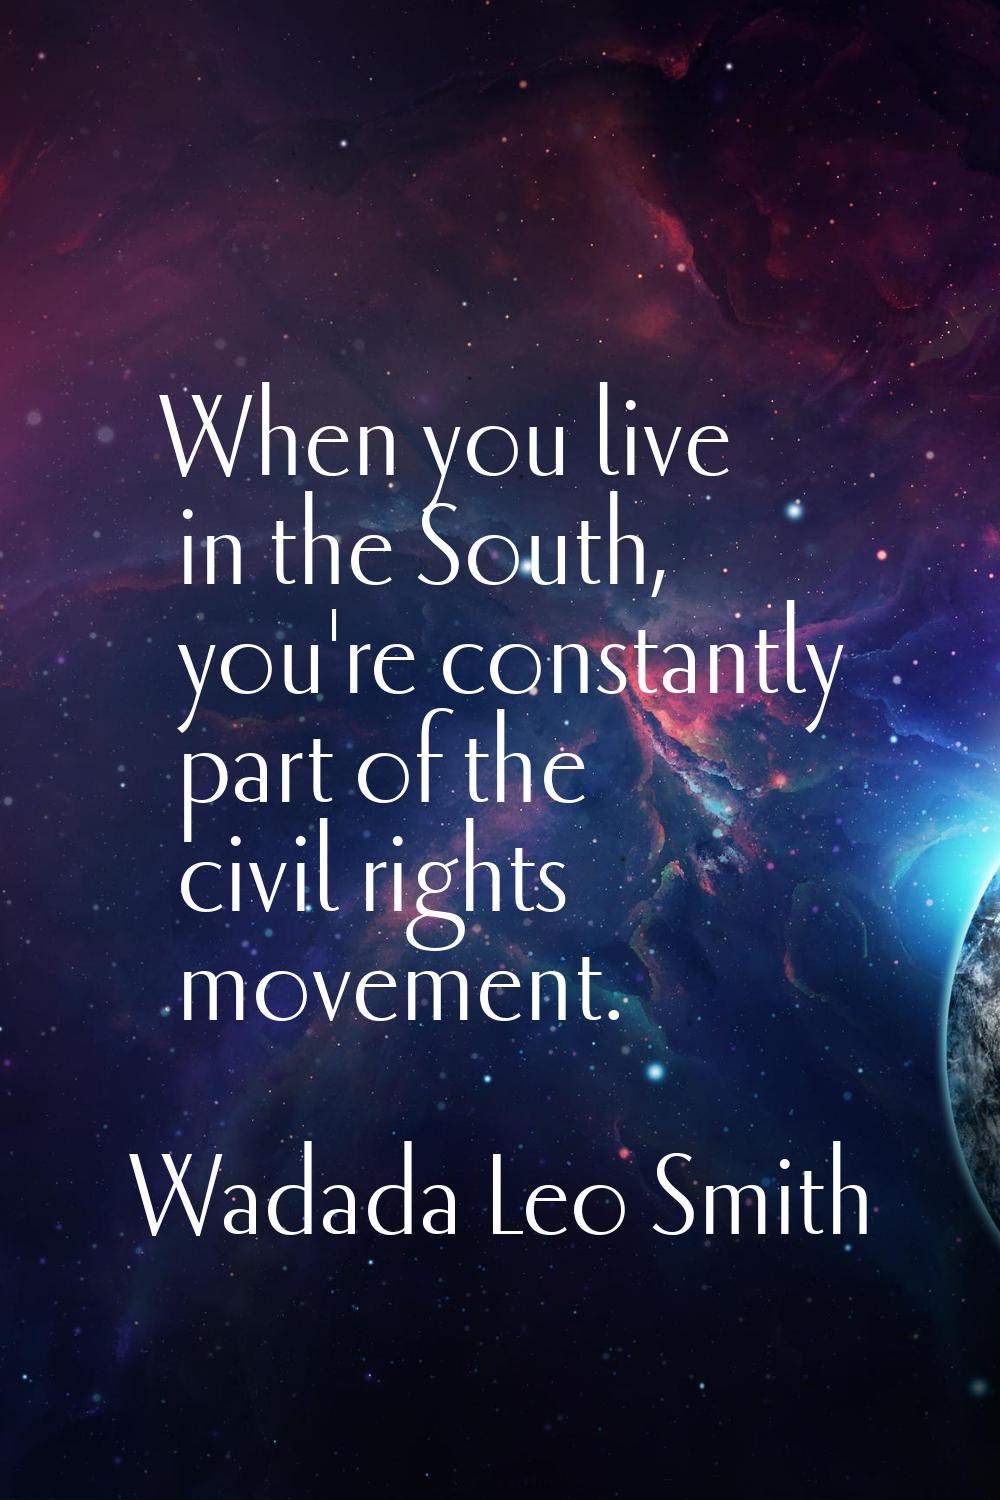 When you live in the South, you're constantly part of the civil rights movement.